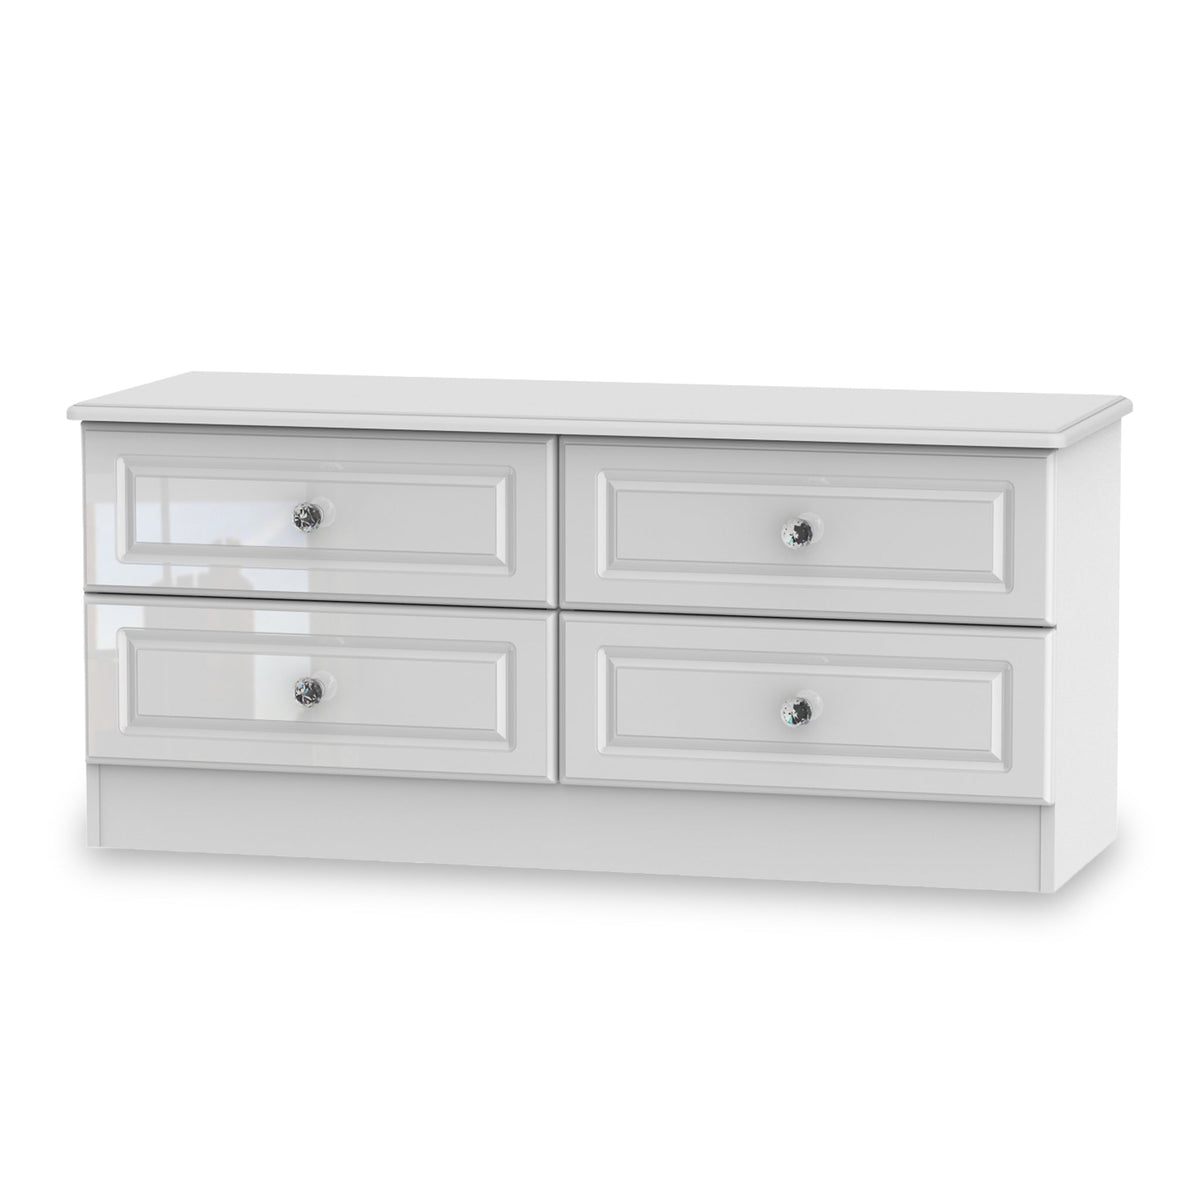 Kinsley White Gloss 4 Drawer Low Storage Unit from Roseland